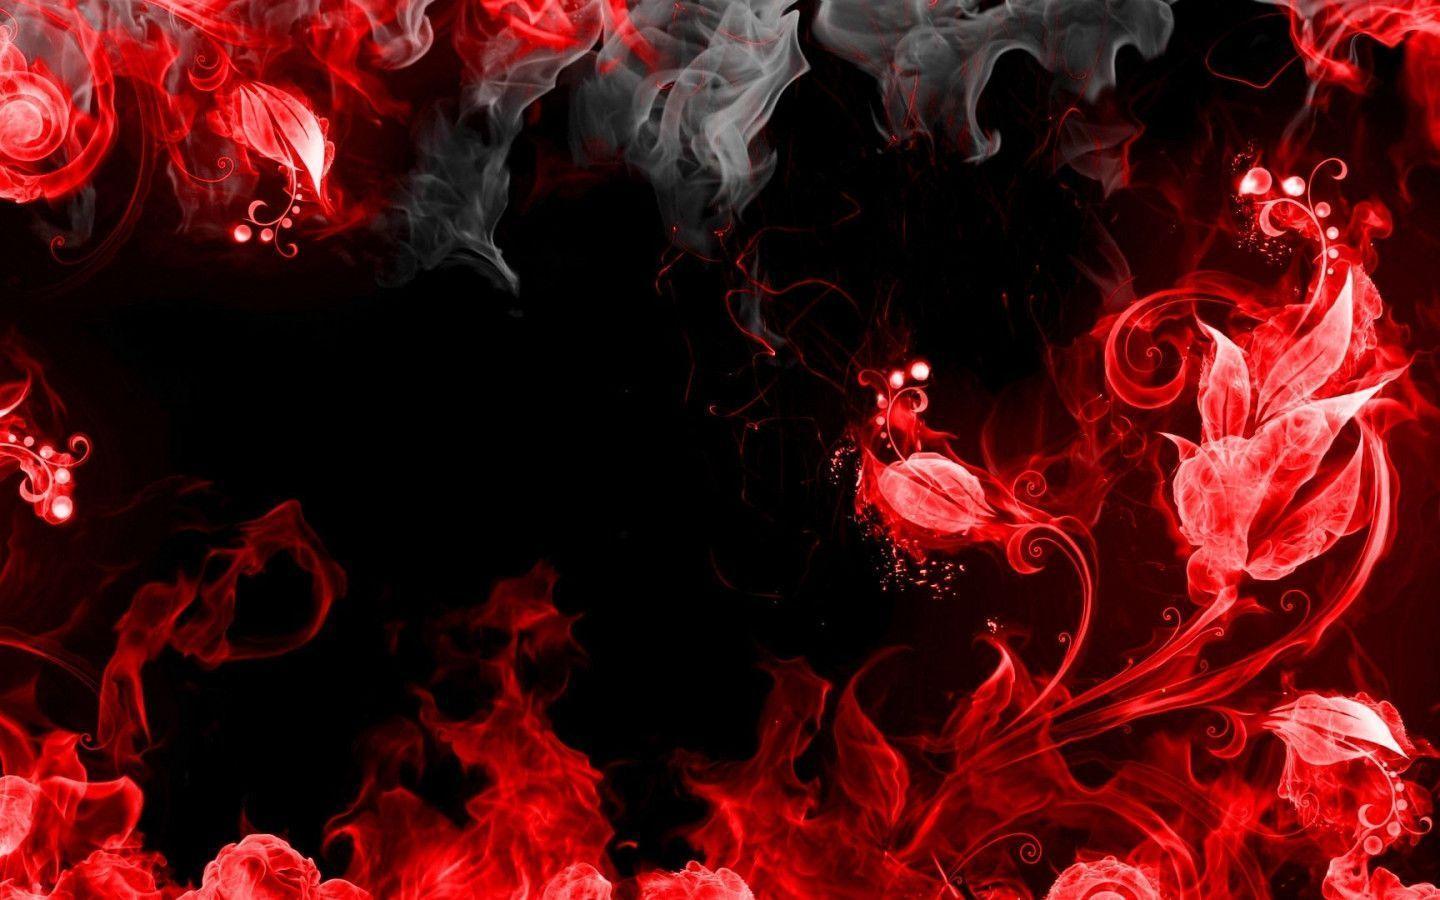 Black And Red Abstract Background Image 6 HD Wallpapercom